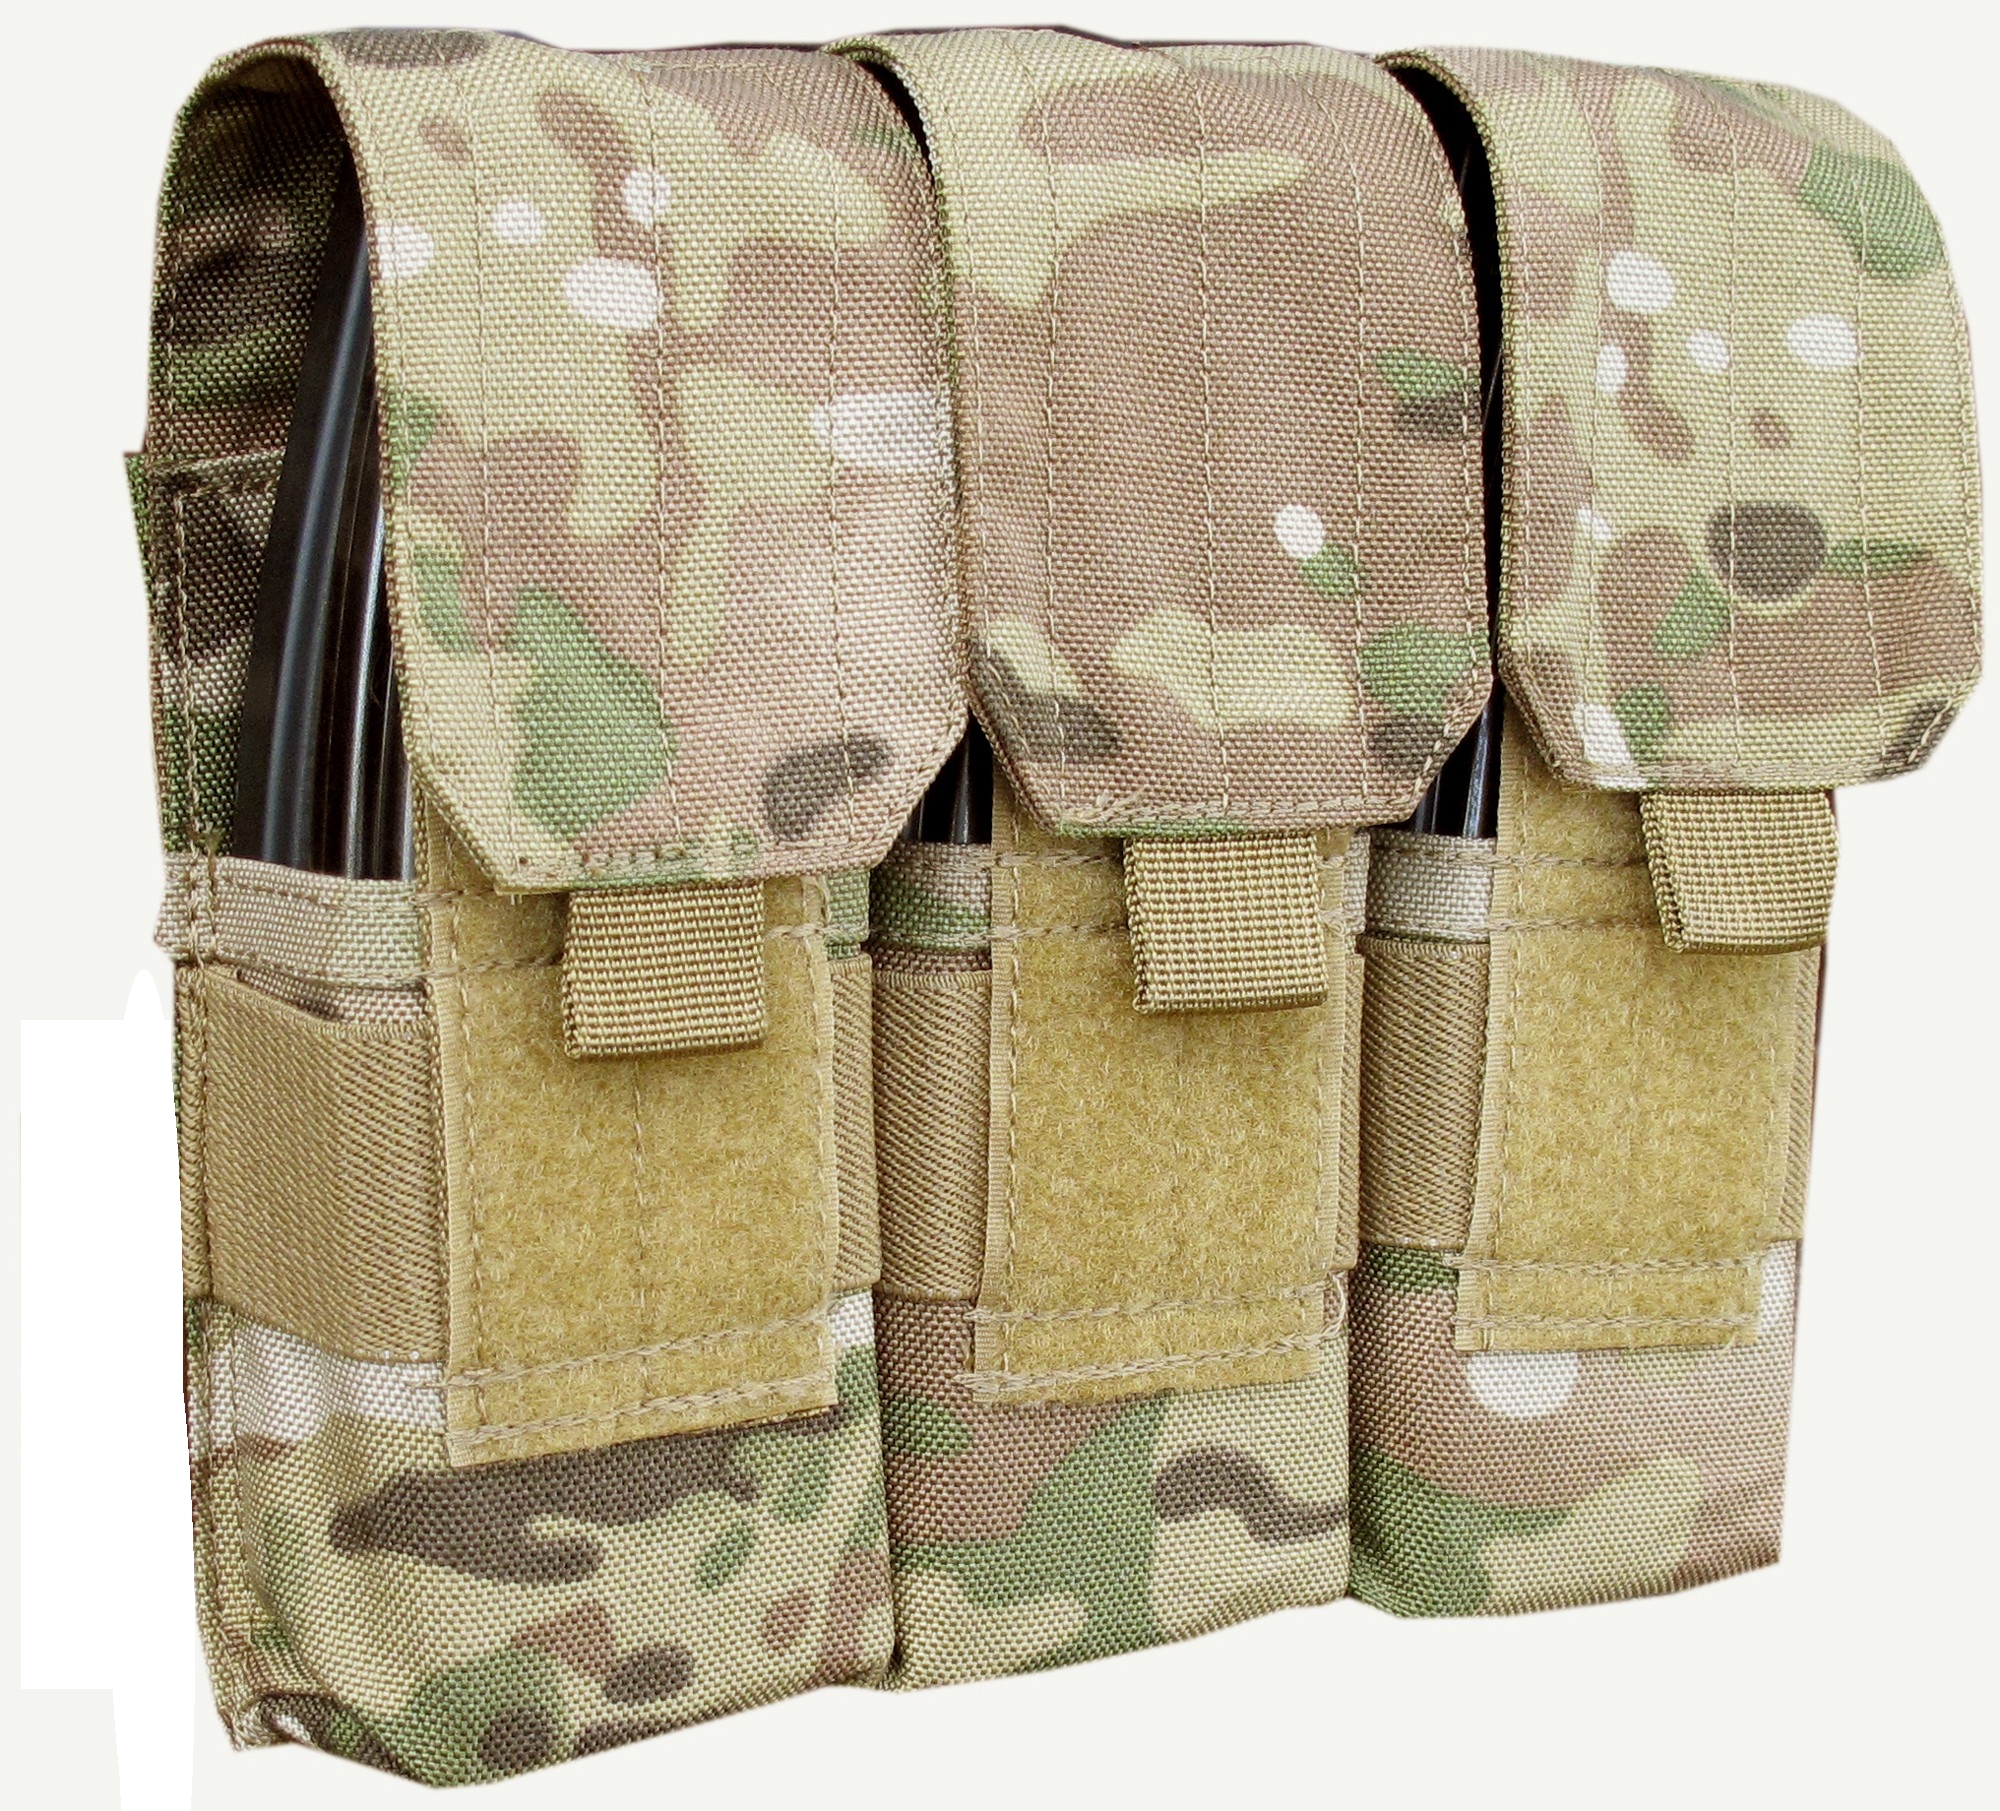 P13 3 AR Mag Pouches Triple mag holder with elastic cord and finger tab for easy and quick accessibility. 3 m.o.l.l.e straps in front, m.o.l.l.e. straps